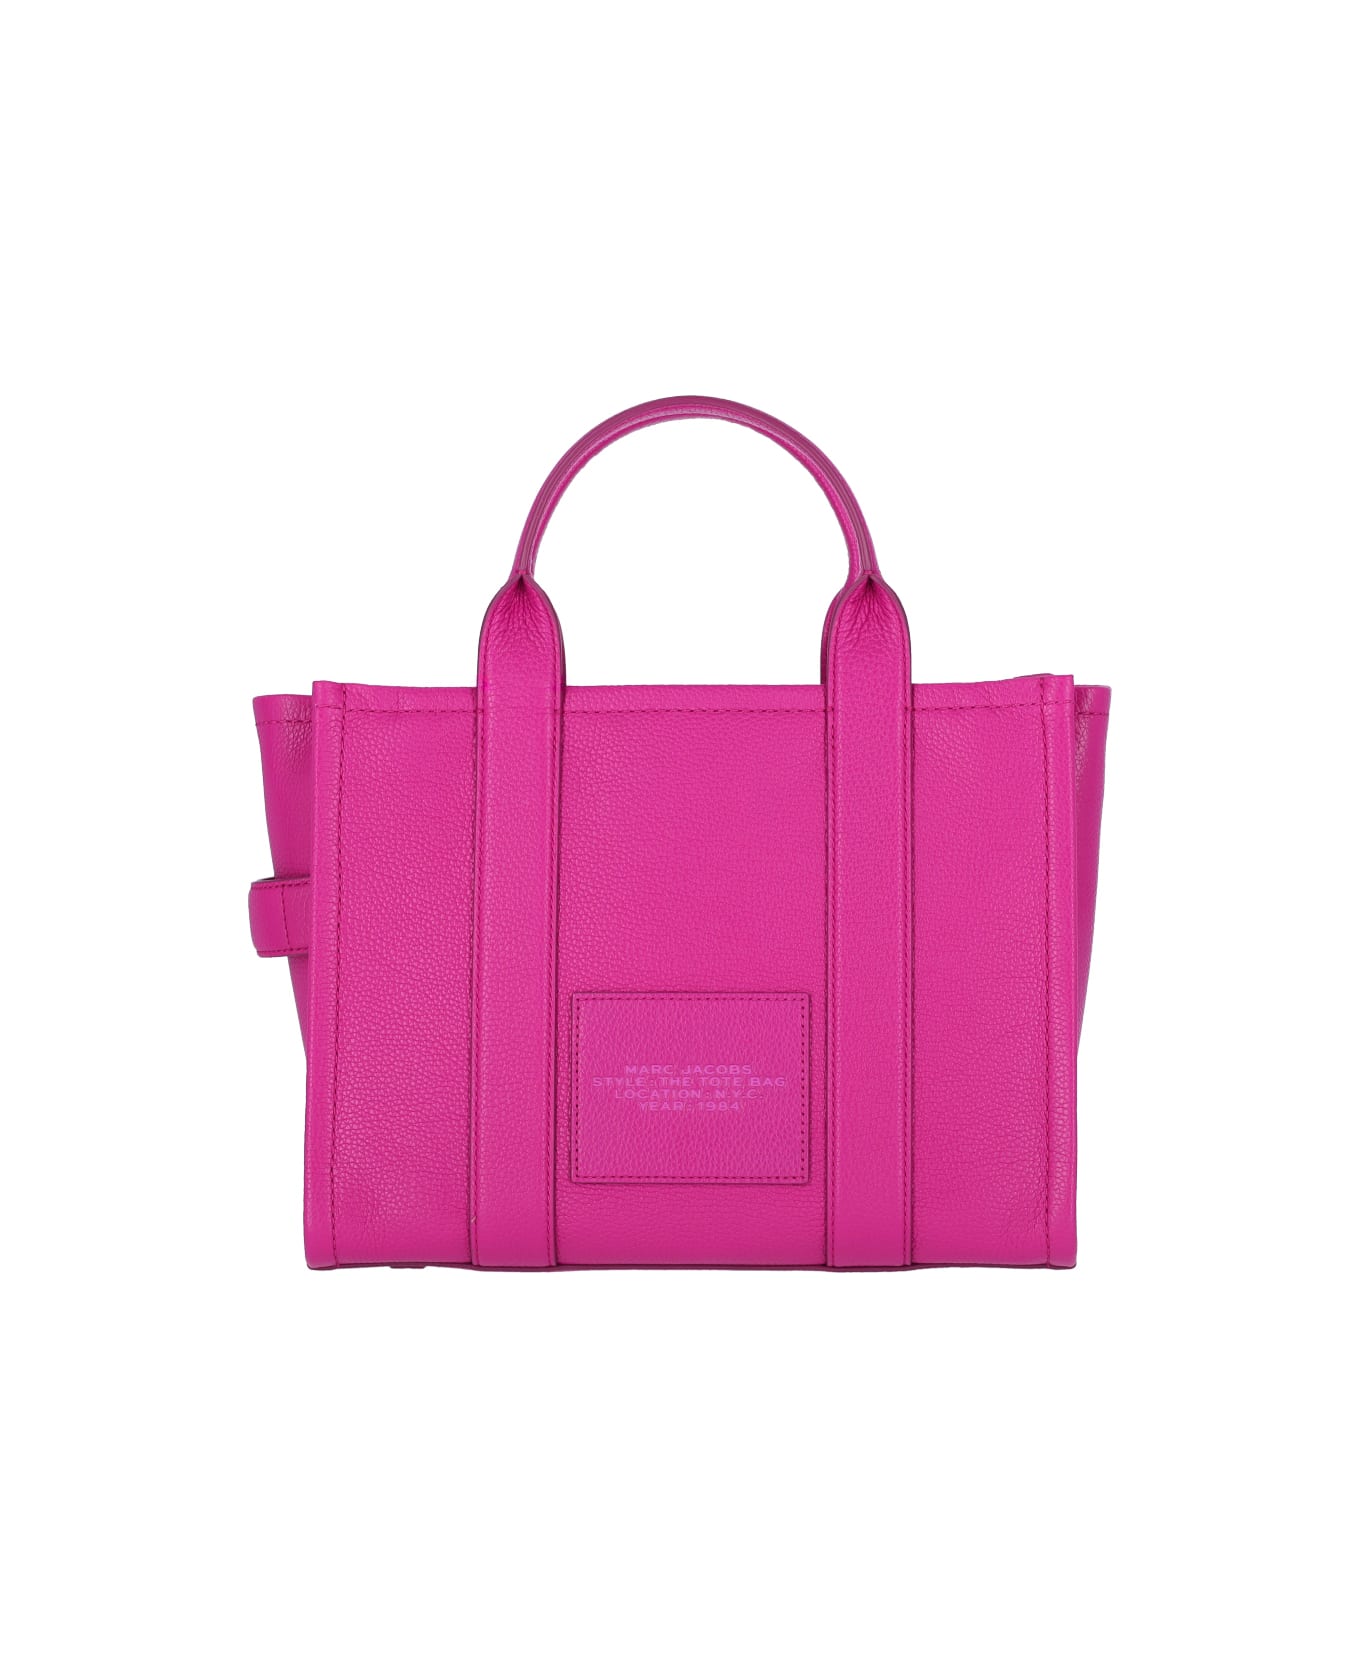 Marc Jacobs The Leather Tote Bag - Violet